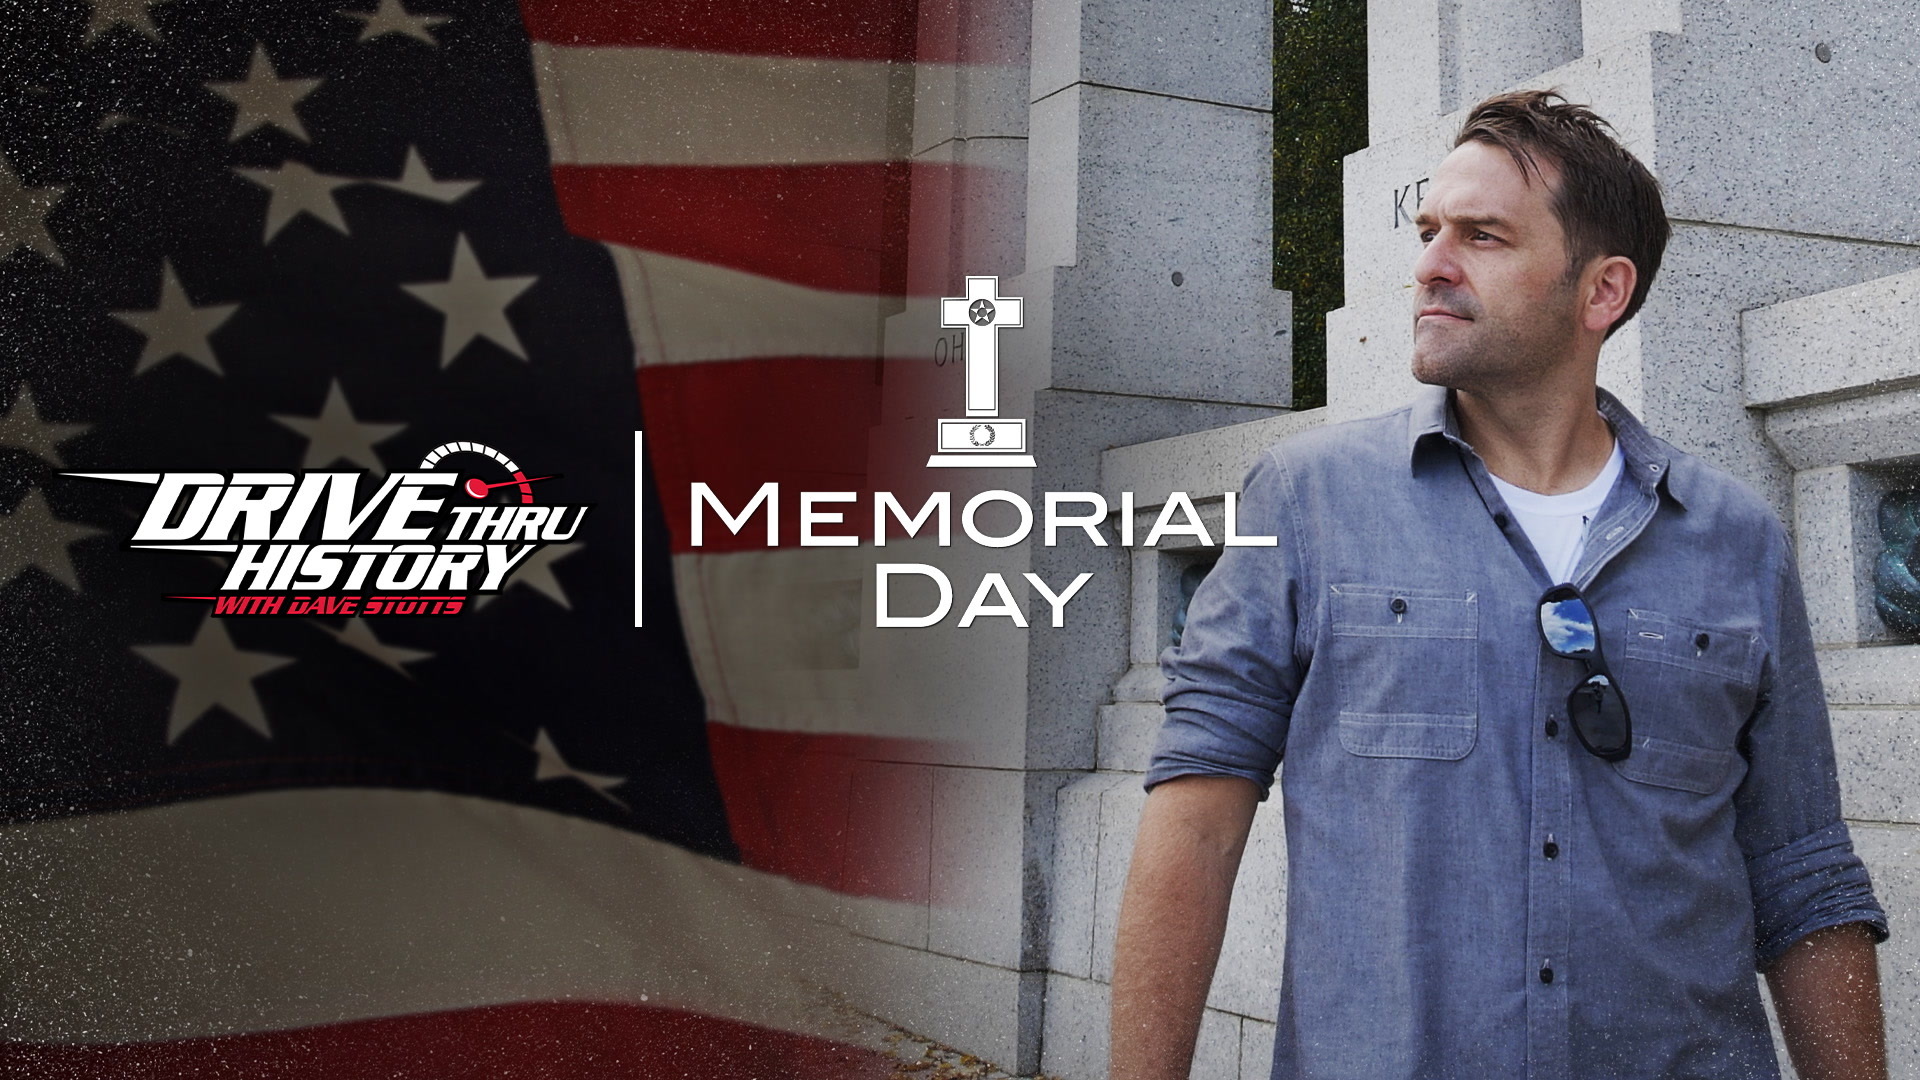 drive_thru_history_special_memorial_day.jpeg